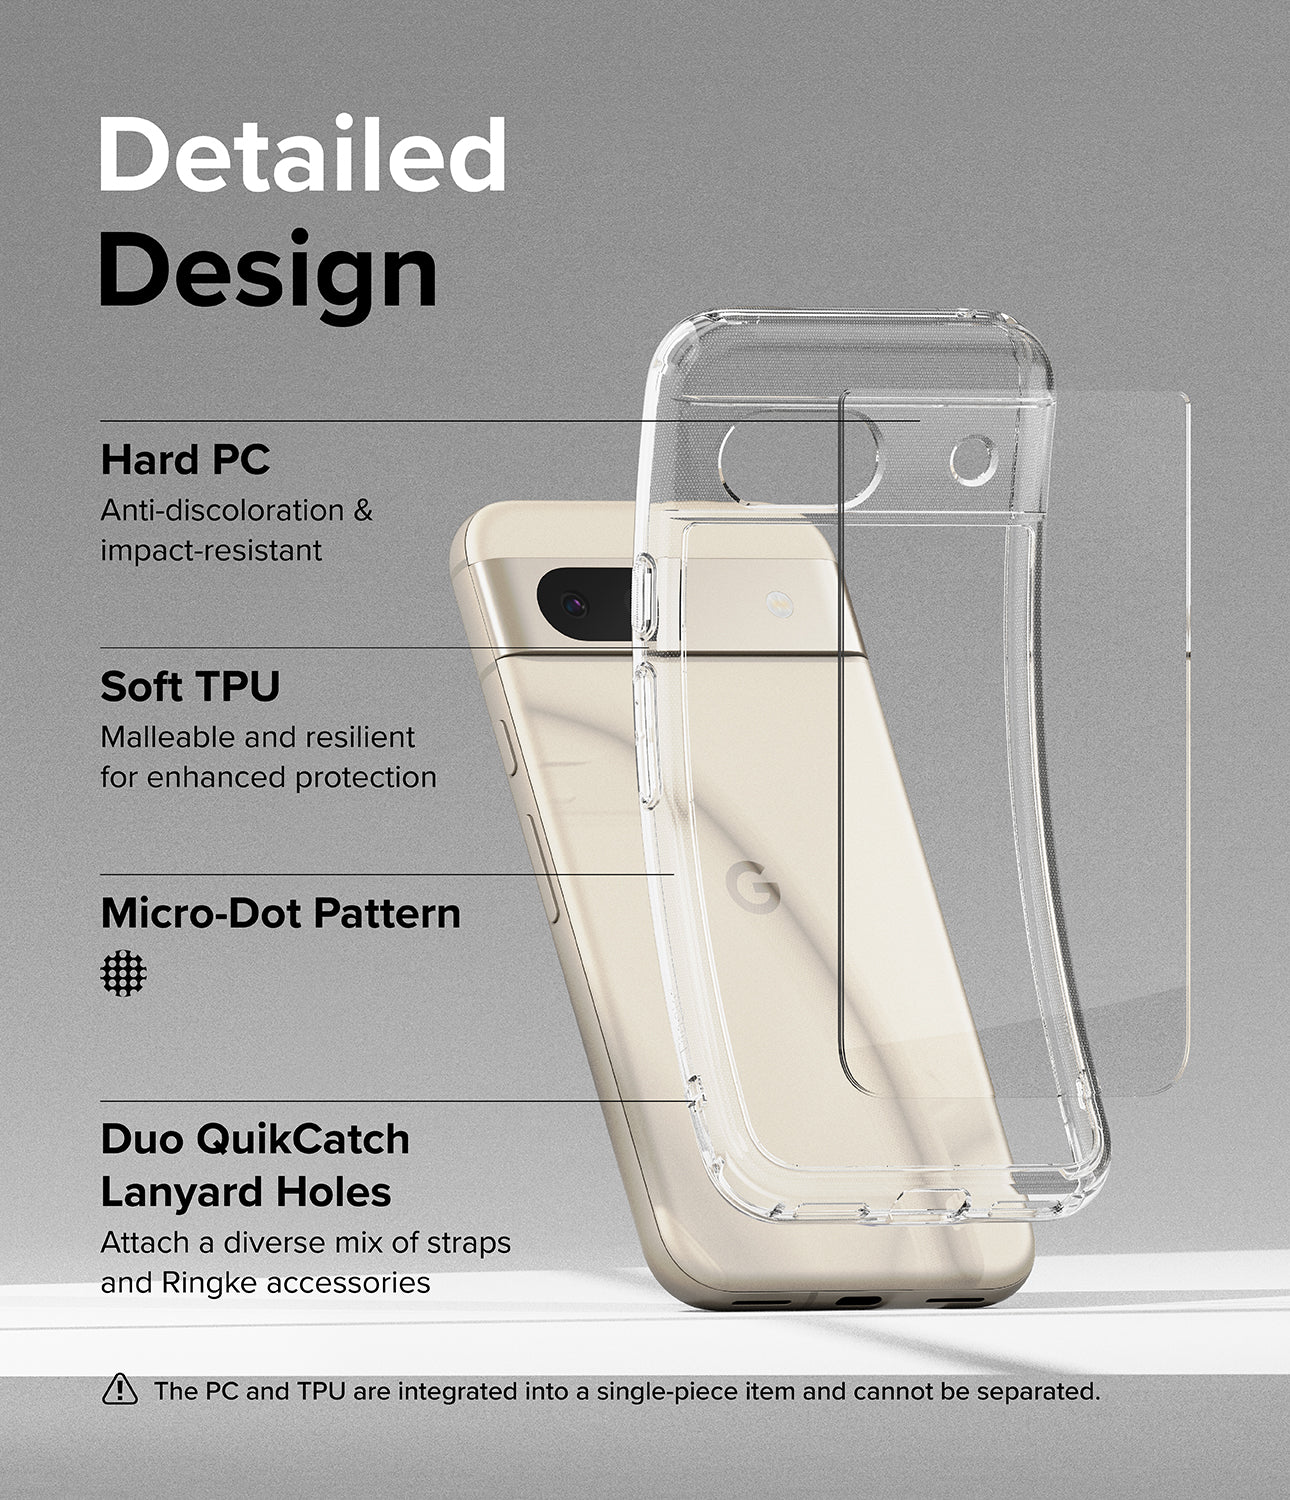 Google Pixel 8a Case | Fusion - Clear - Detailed Design. Anti-discoloration and impact-resistant with Hard PC. Malleable and resilient for enhanced protection with Soft TPU. Micro-Dot Pattern. Attach a diverse mix of straps and Ringke accessories.